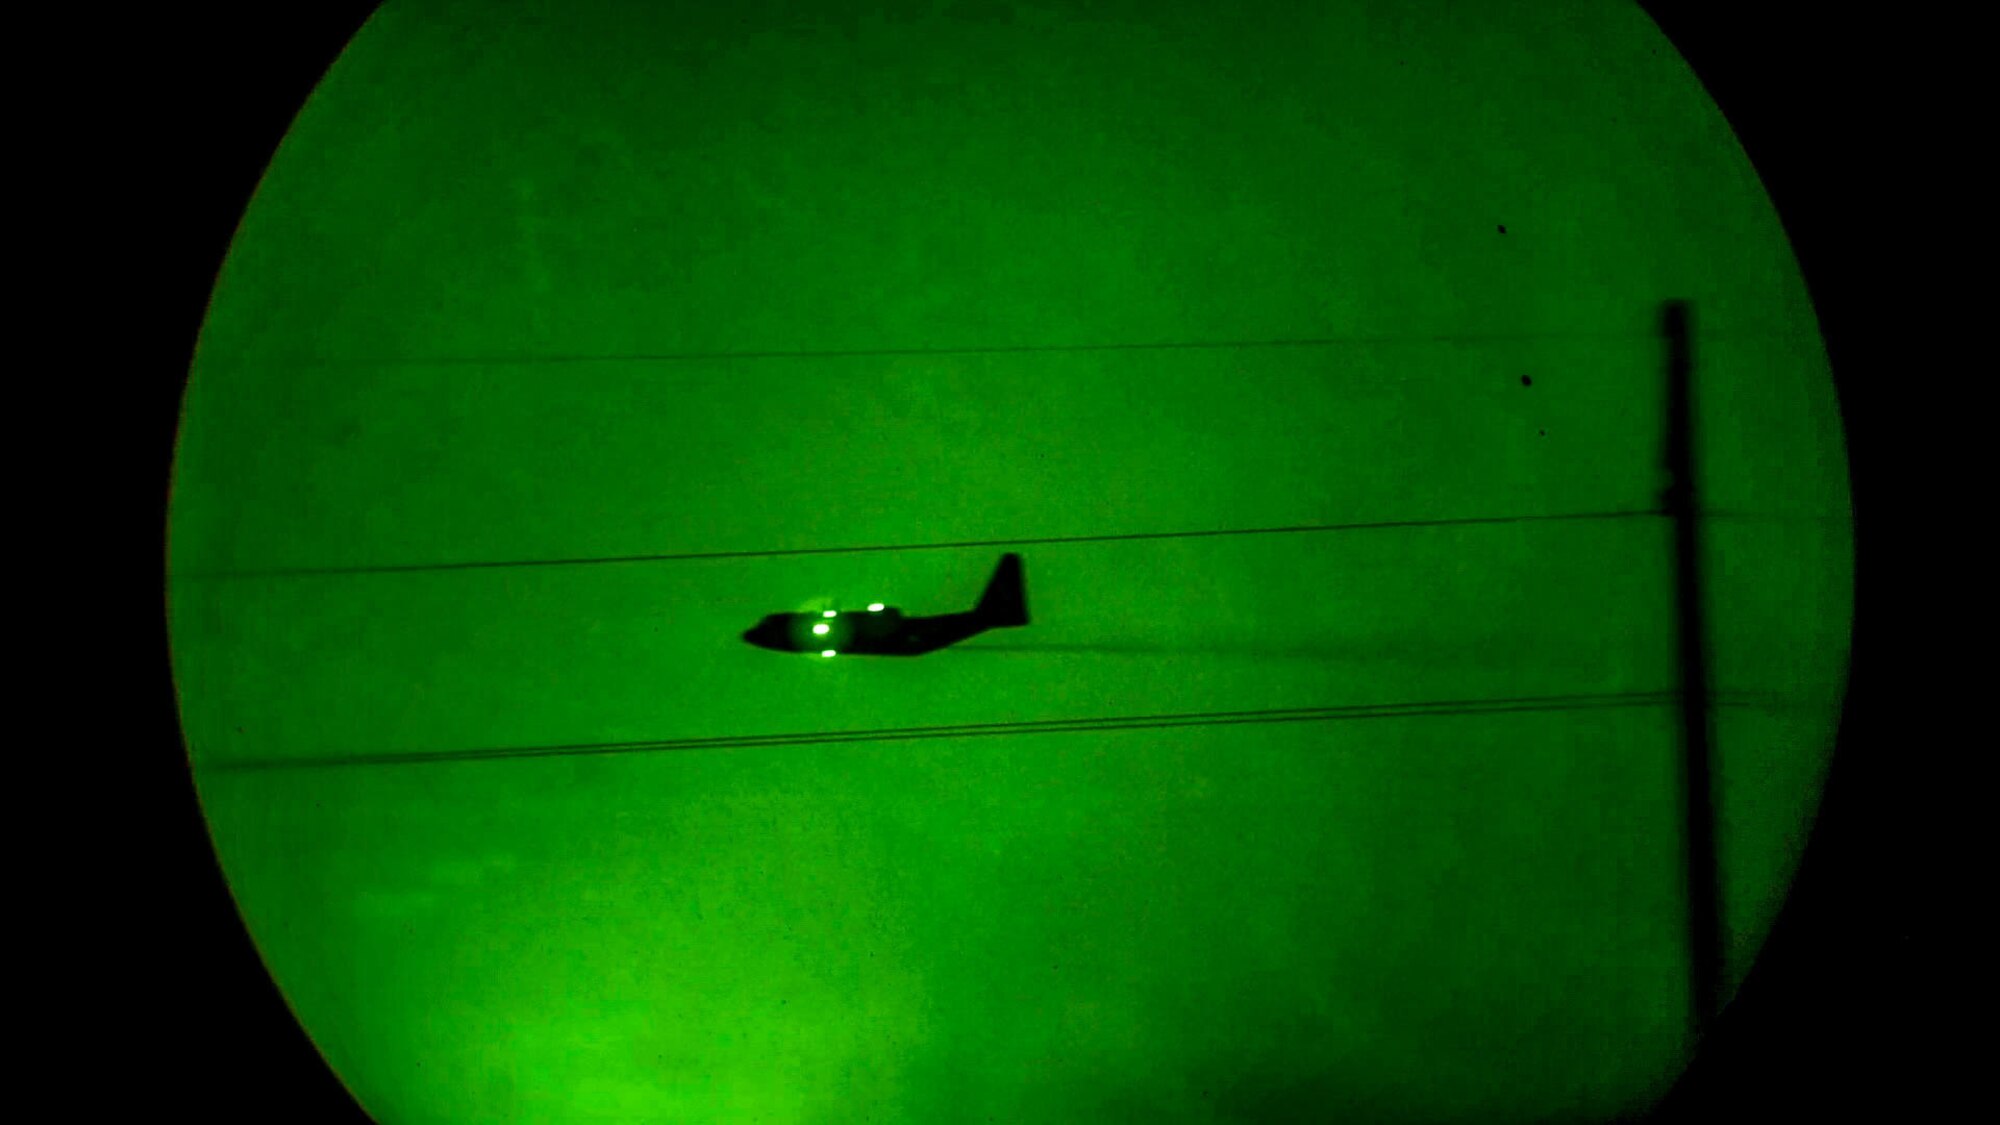 MASS C-130s fly evening missions in Louisiana